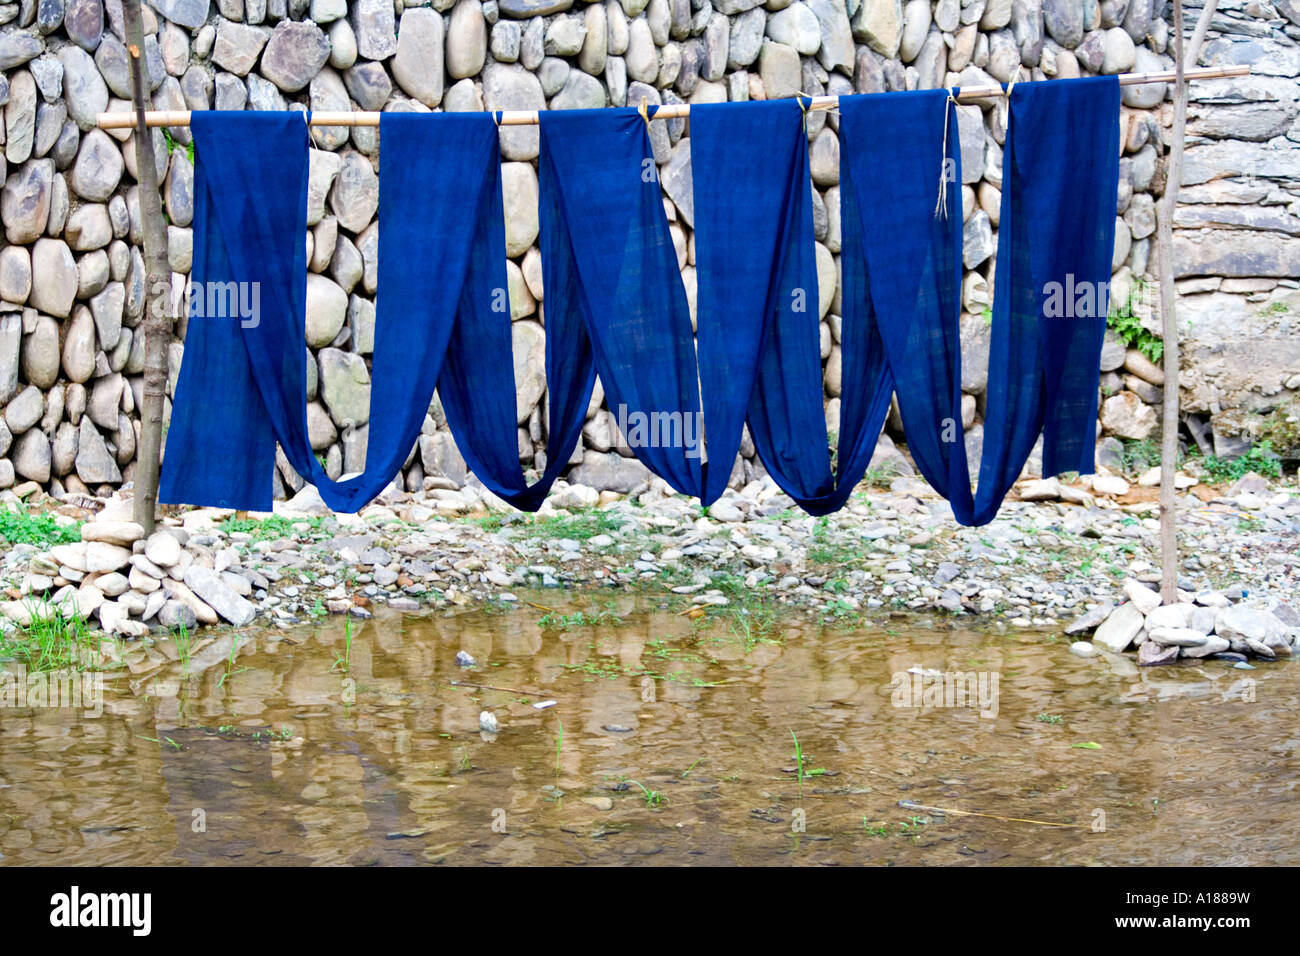 Indigo Fabric Hung to Dry after Dying, Zhaoxing, China Stock Photo